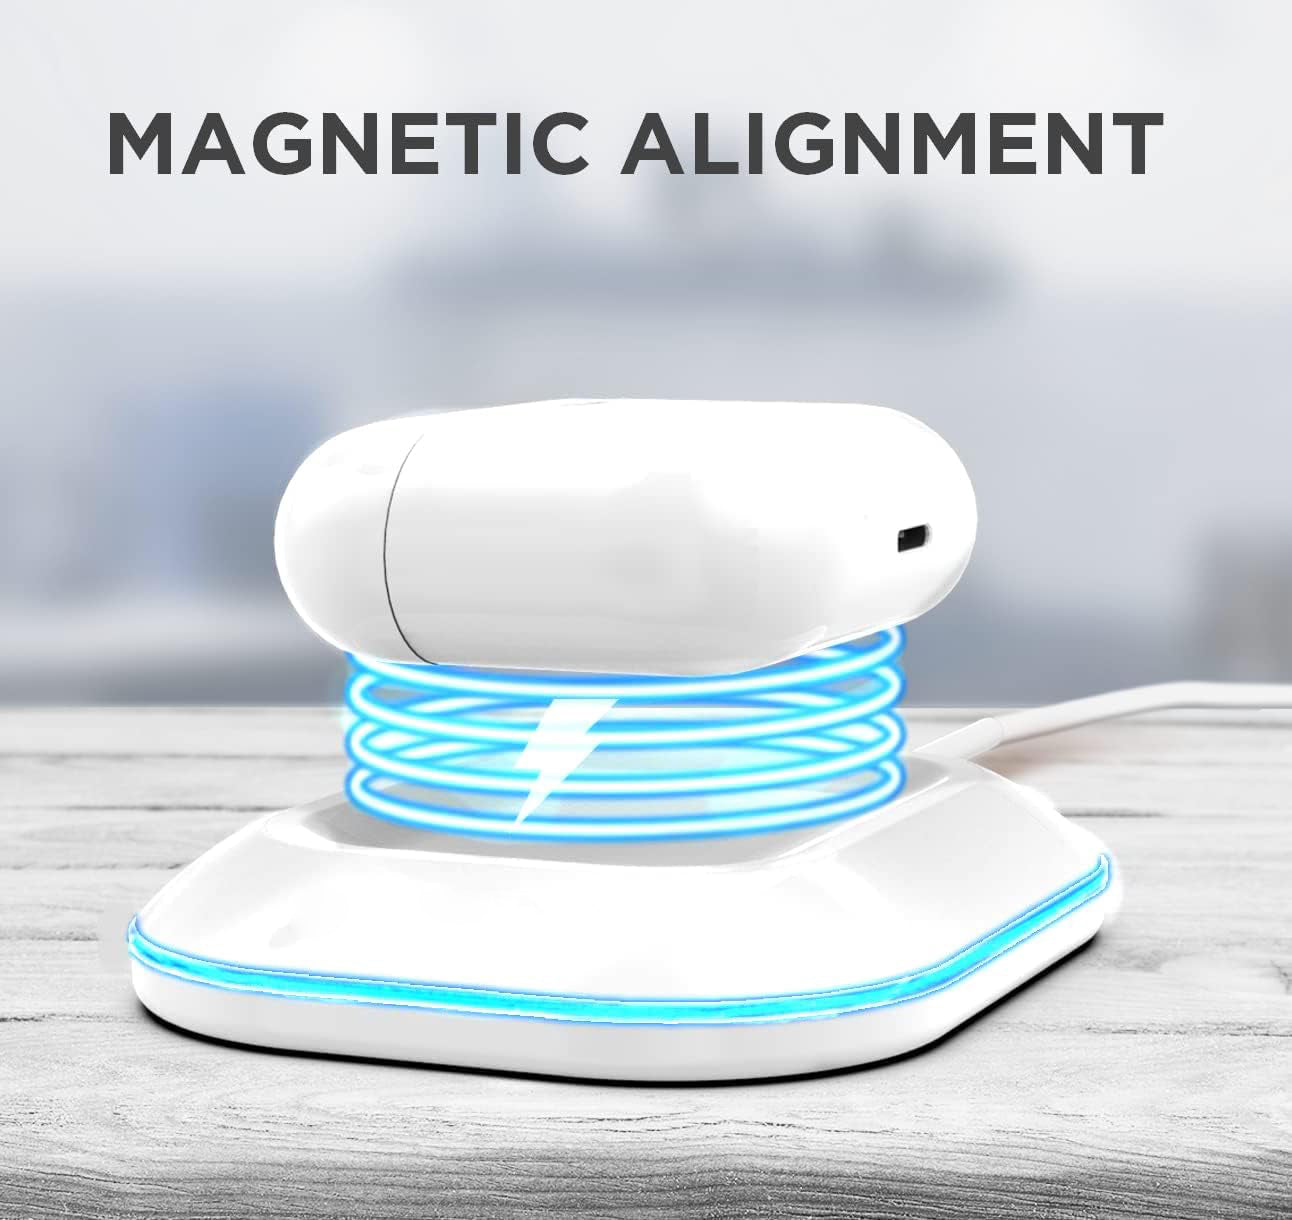 Wireless Charger Designed for Airpods Pro and 2nd / 3rd Gen Models - Magnetic Charging Alignment, Softglow Power Indicator (White)